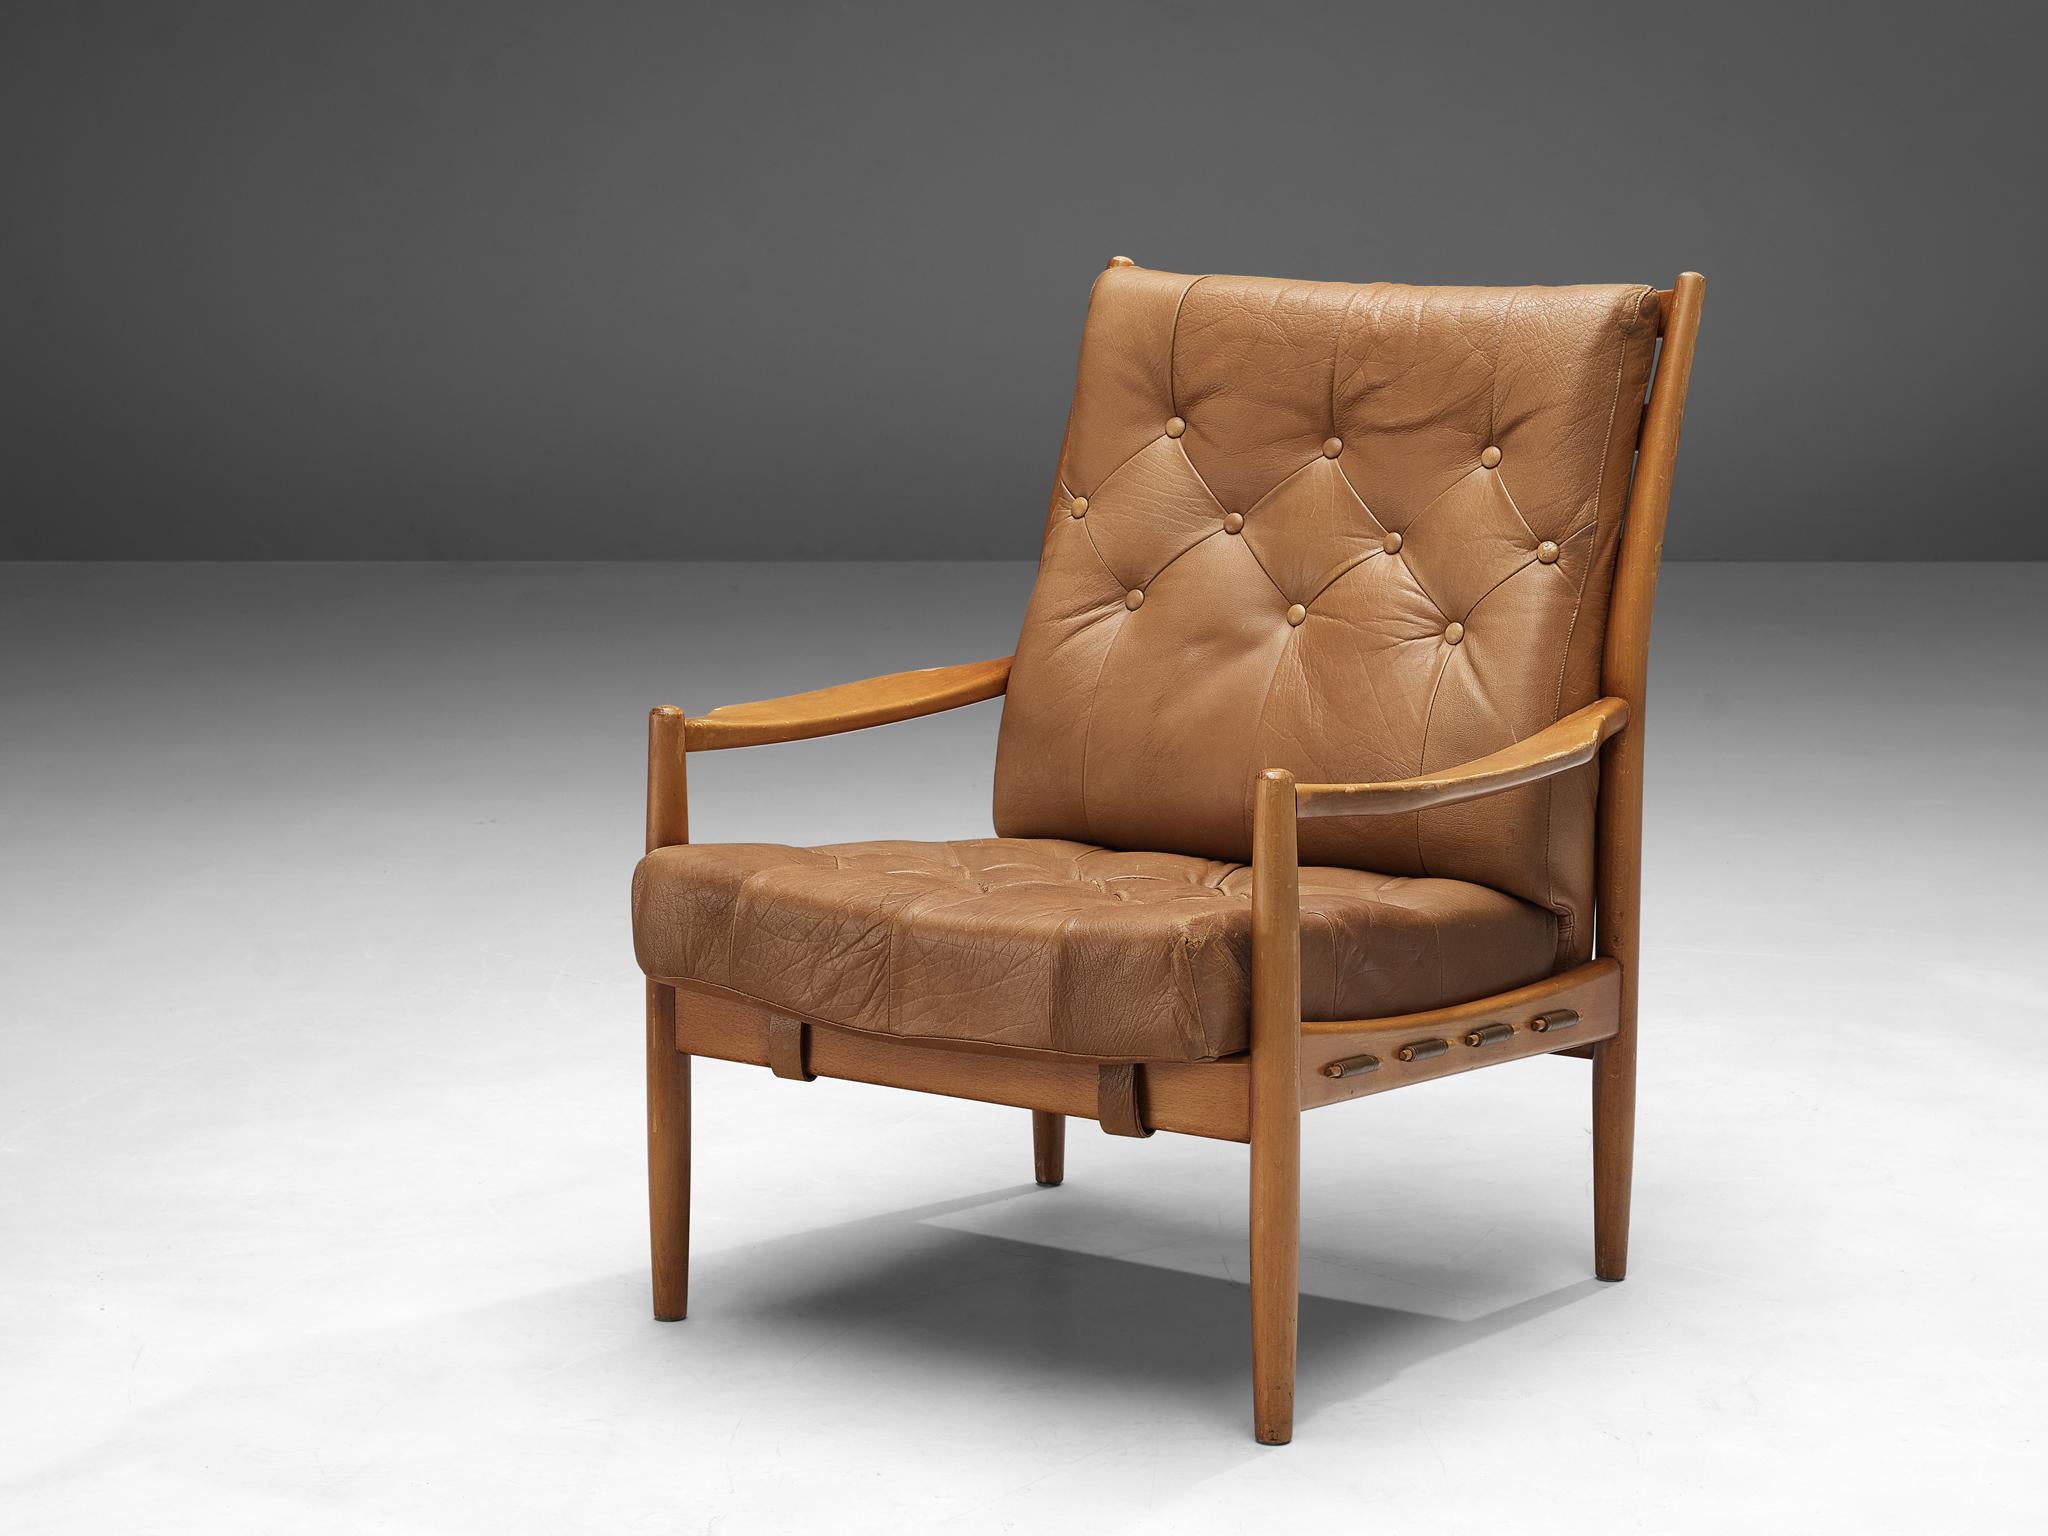 Armchair, beech, leatherette, Danish, 1960s. 

This stately and well-executed Danish high back armchair shows an exquisite level of craftsmanship. The lines and finishes in this item are both curvy and crisp. The frame shows traits of the